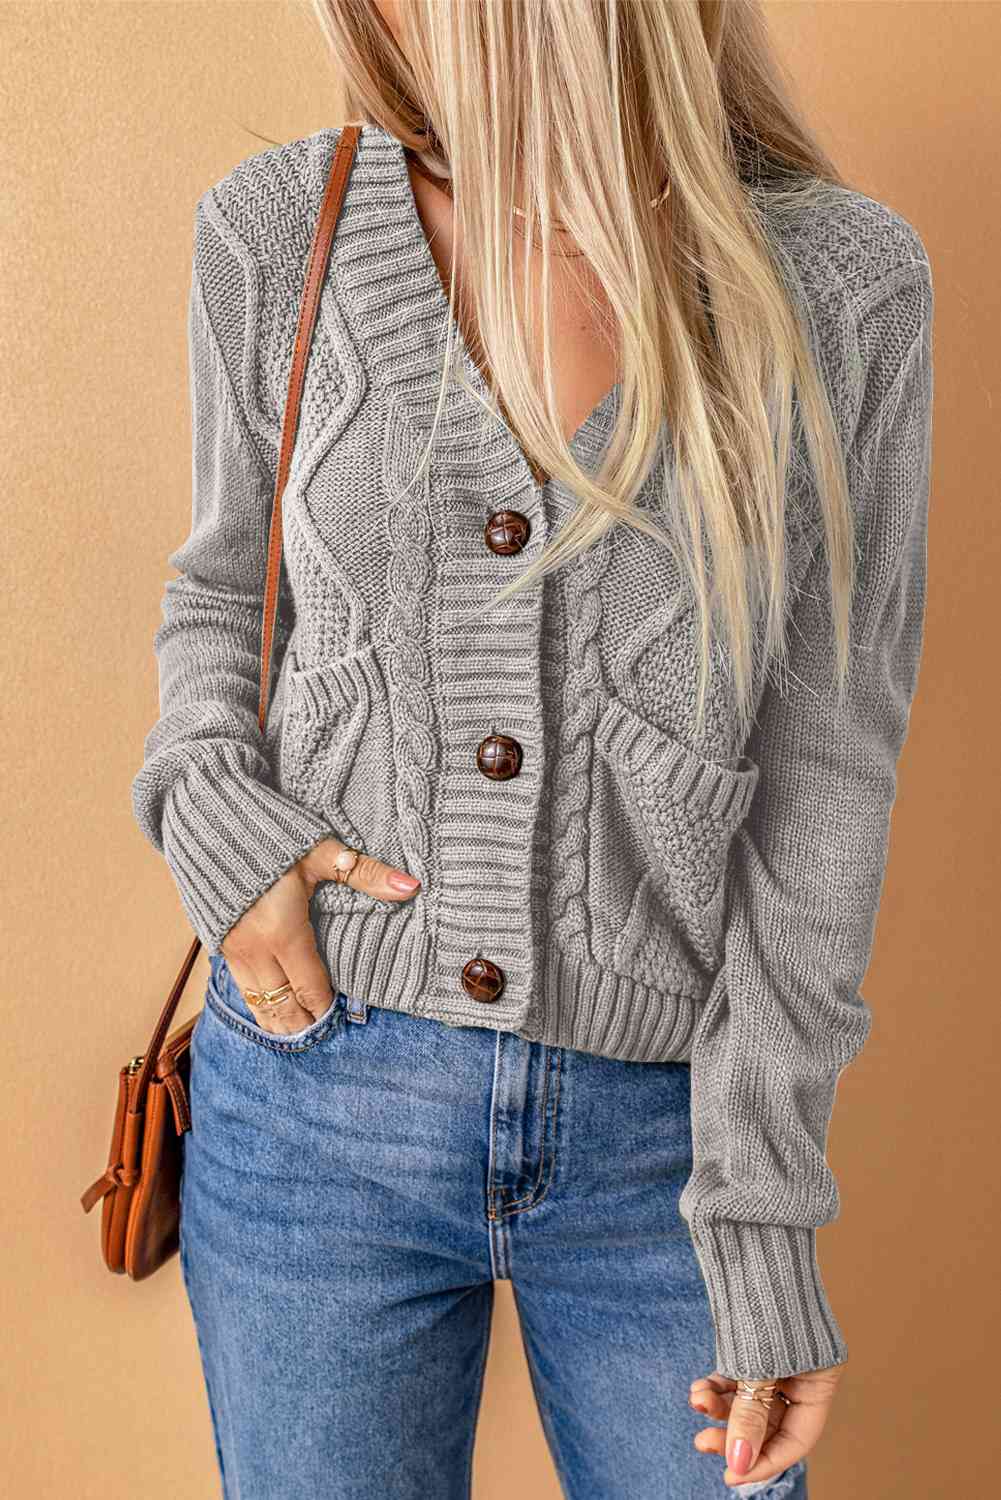 Woven Right Mixed Knit Button Down Cardigan with Pockets - Tigbuls Variety Fashion